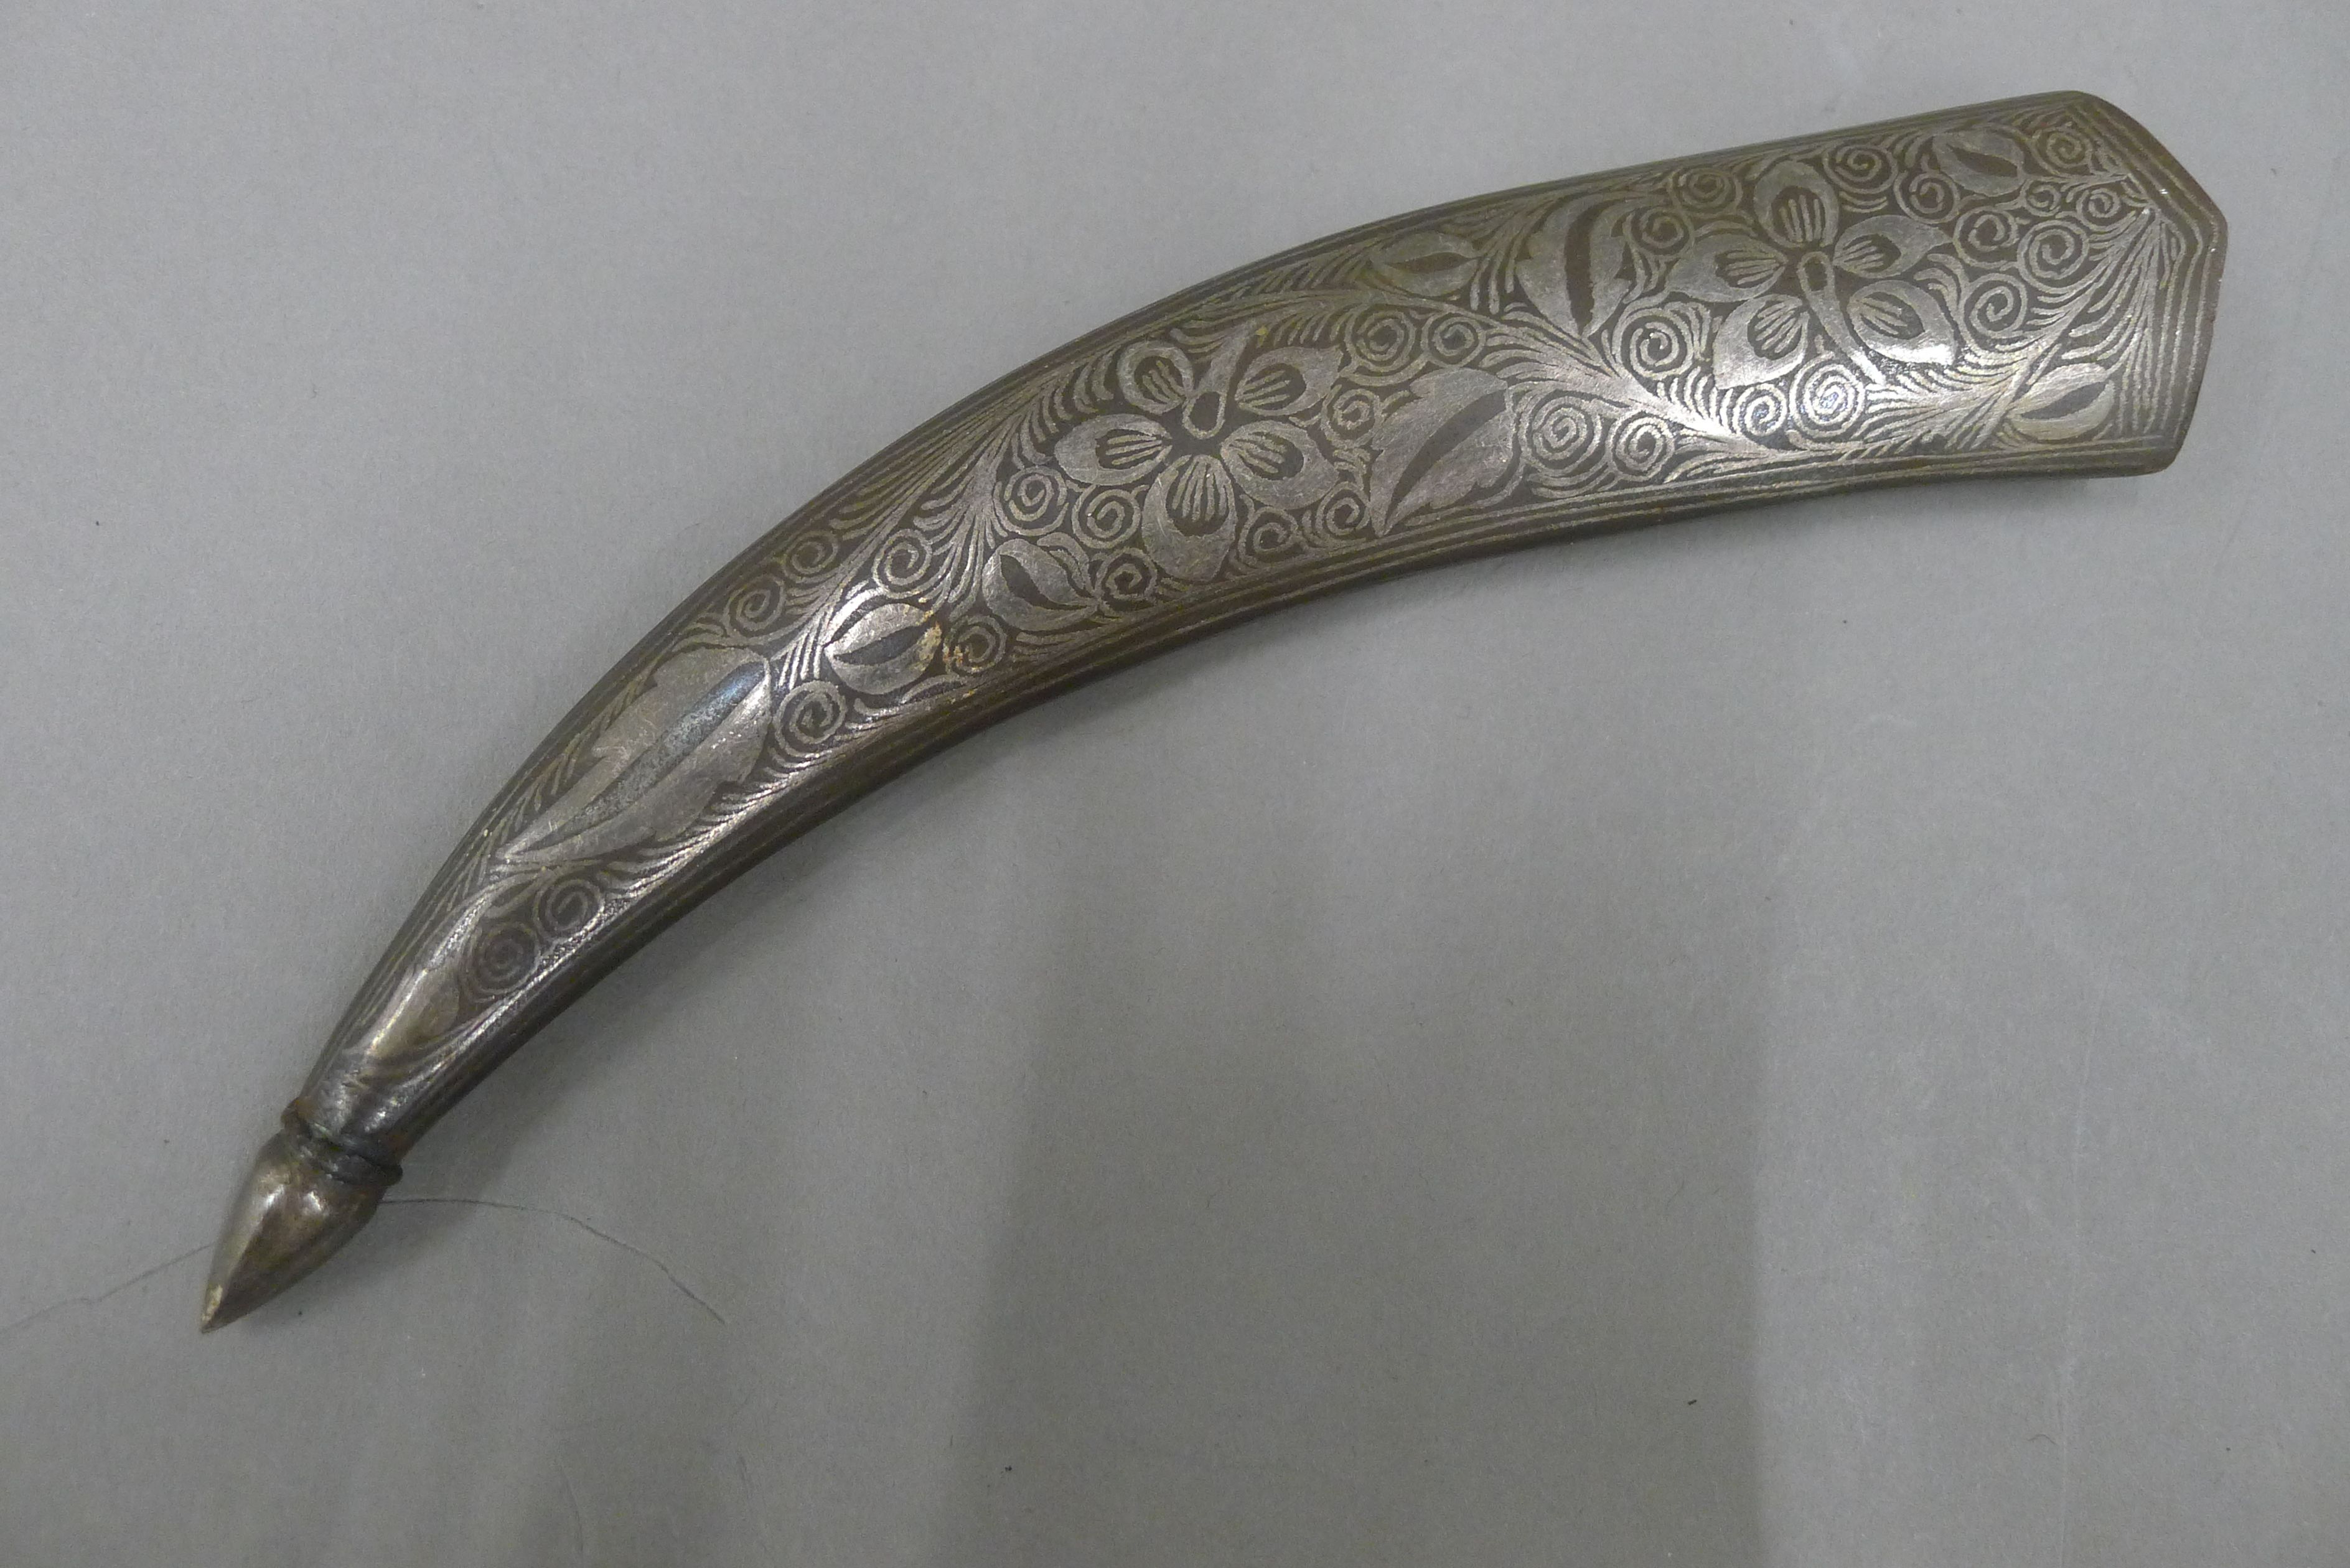 A 19th century Persian knife, the steel scabbard and grip inlaid with silver, - Image 6 of 6